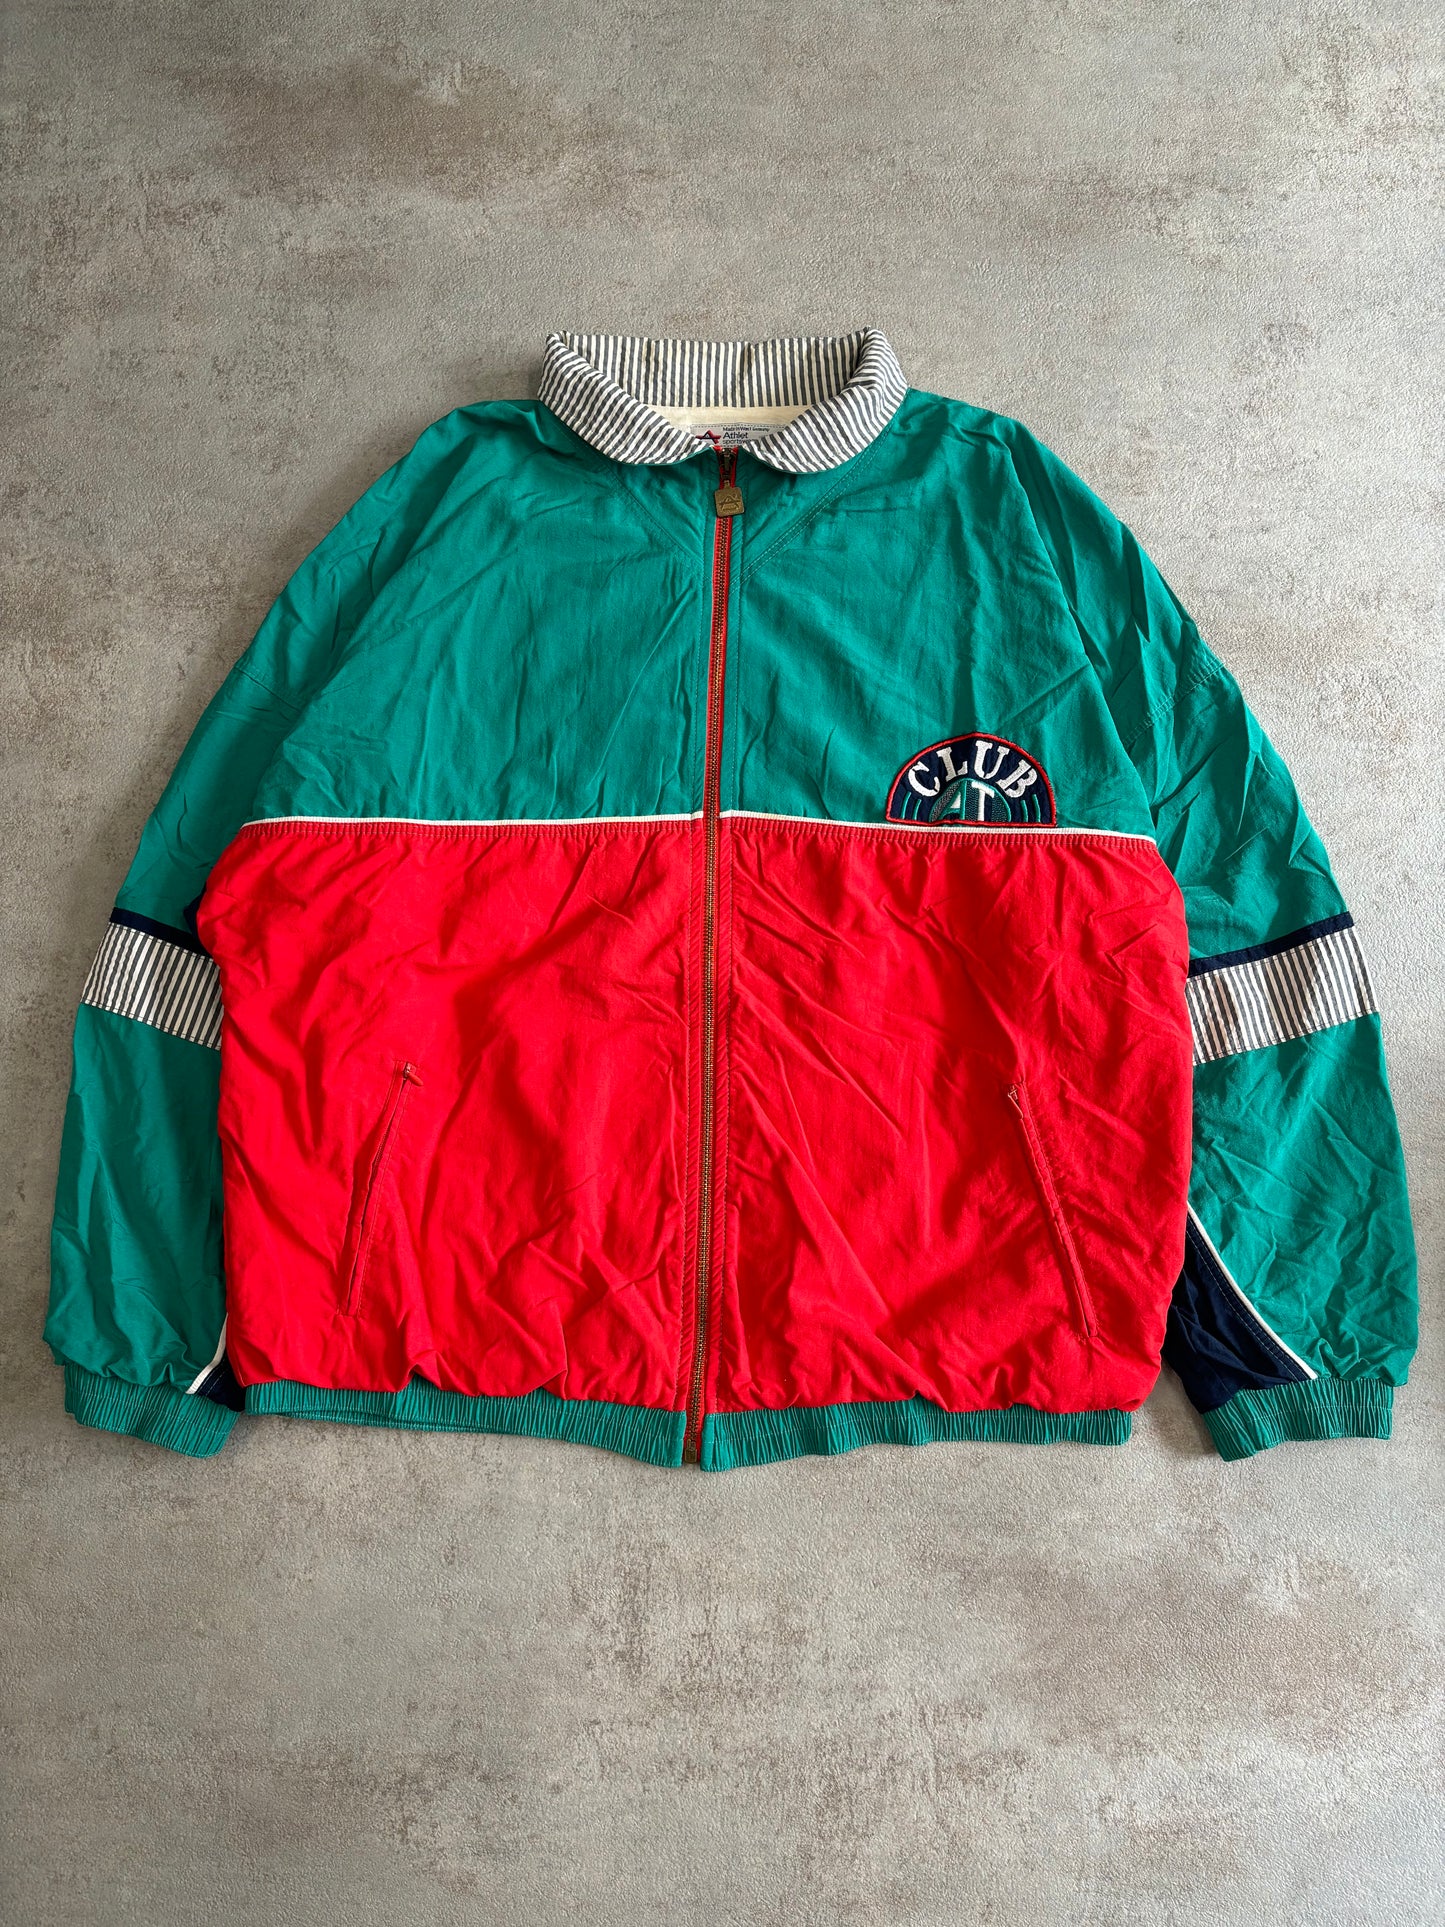 Track Sport Jacket 'Made In West Germany' 80s - M